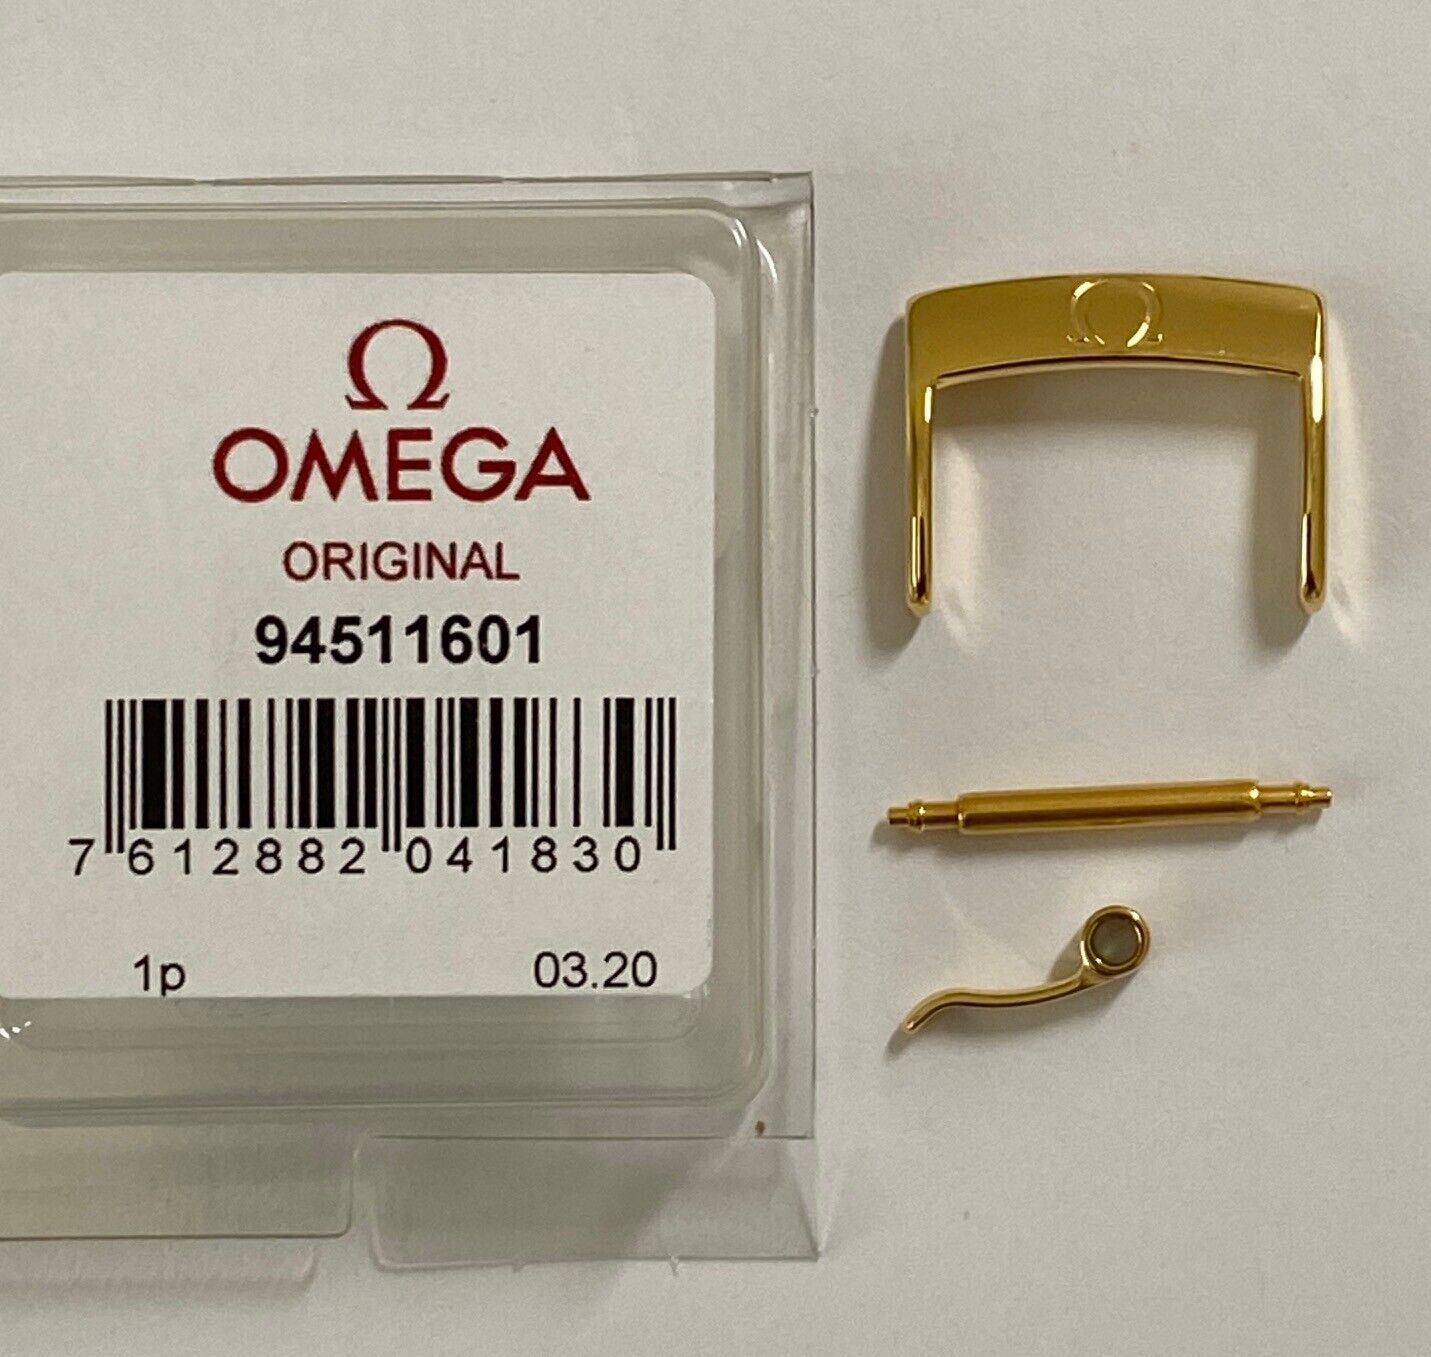 ORIGINAL OMEGA 16mm GOLD CLASP BUCKLE # 94511601 FITS 16mm STRAP BREADTH